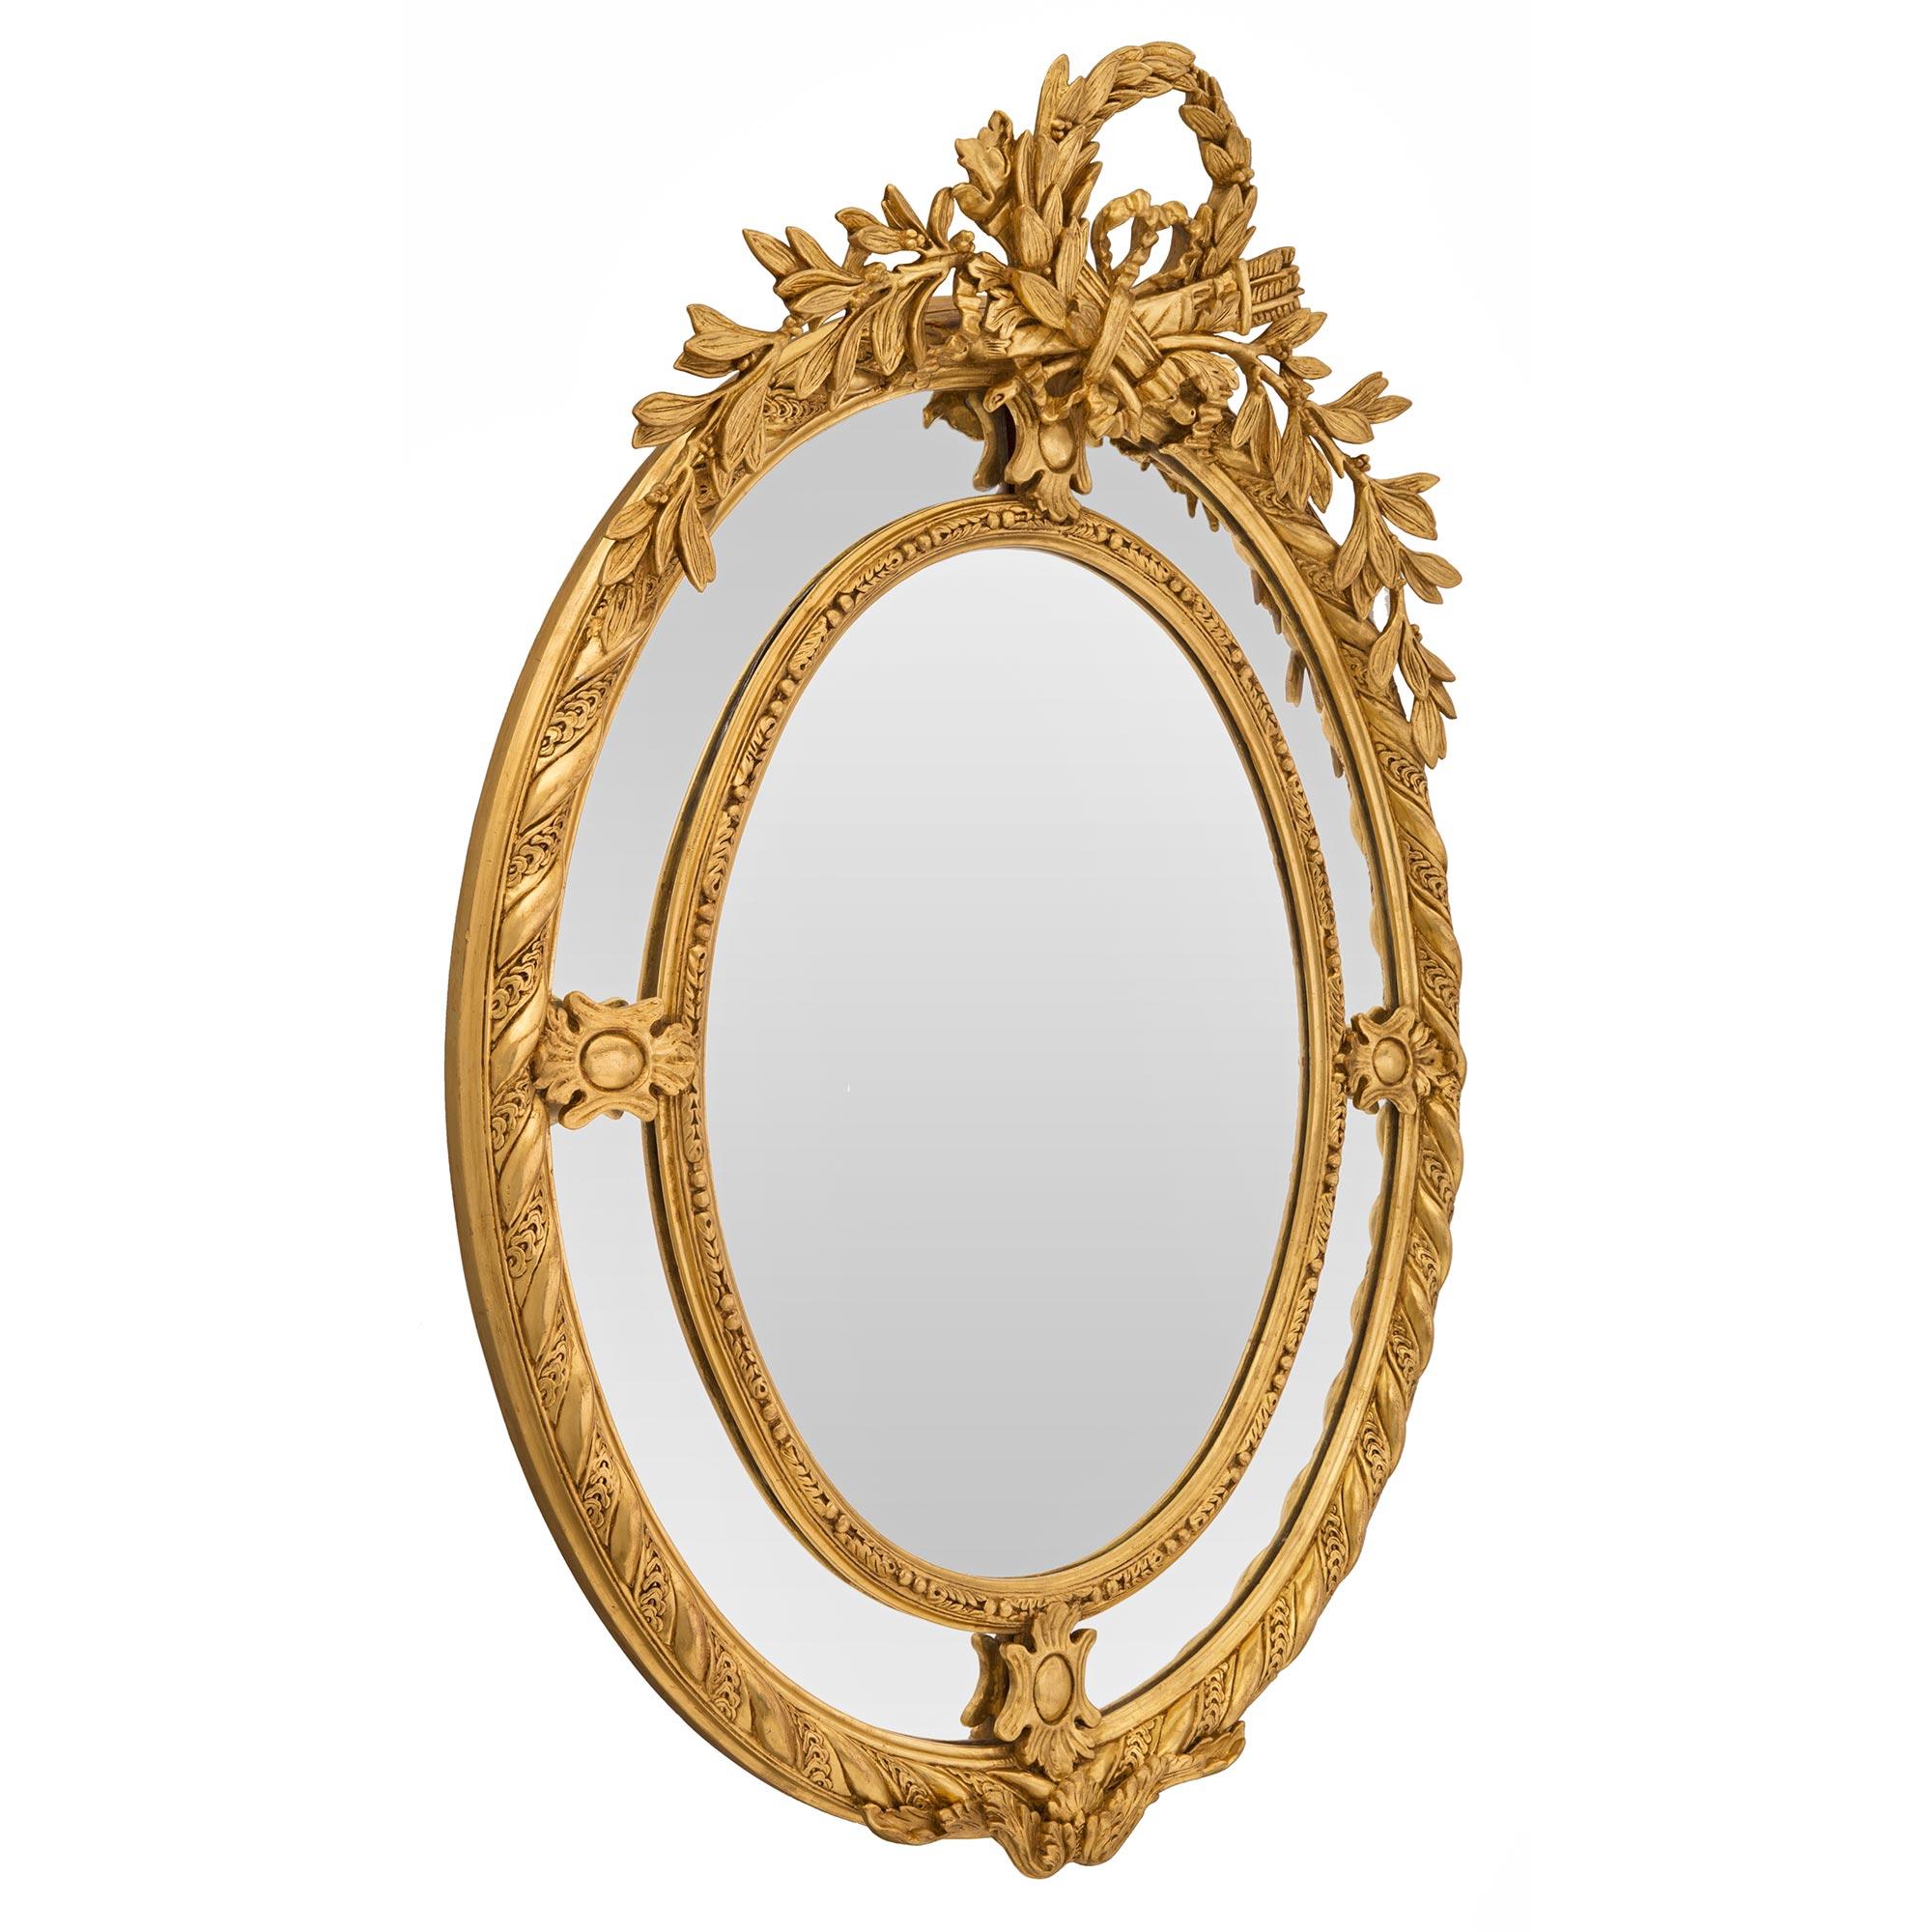 An exceptional and most elegant French 19th century double framed giltwood mirror. The oval mirror retains all of its original mirror plates throughout. The central mirror plate is set within a lovely finely detailed foliate and beaded border while